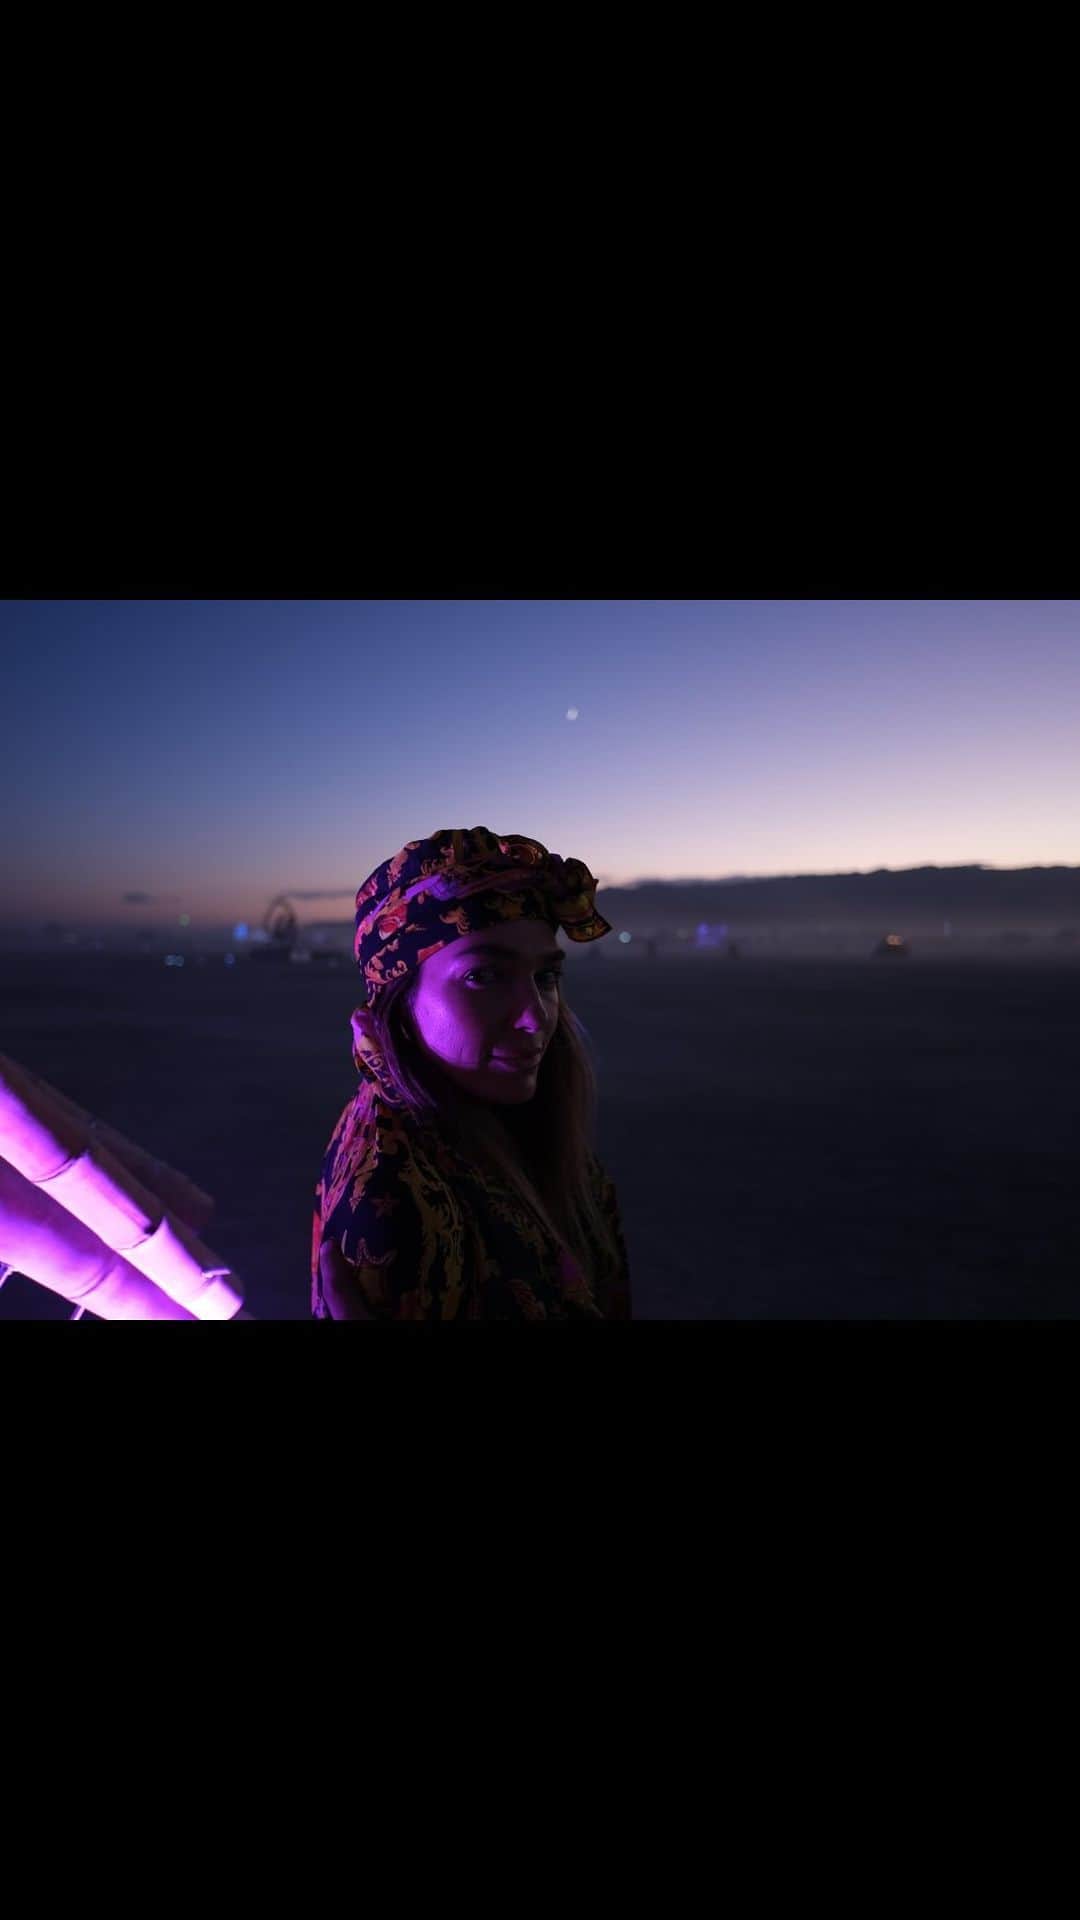 アシュリー・ハートのインスタグラム：「I feel that familiar mystical rumble of Burning Man rearing its yearly roar. And although I sadly won't be attending this year, it's still working its magic on me. I felt inspired to share a snippet of the last captured (not yet posted) episode of my HARTFWRD YouTube channel. This is my take on what Burning Man represents.. and how last year's experience was one of my most challenging yet rightfully representative of the power, principles and all that Burning Man stands for, for me. Putting myself in this potent environment not only confronted me with the intensity of changes I was actually facing at this time in my life but essentially reflected back to me the pain of reality I was in avoidance of feeling. It was all amplified on the playa yet also allowed me the space and perspective to be with all that was, showing me how I needed to lean into the discomfort and fully show up for what mattered most. Which at this time; was to let go of all I was trying to hold up within my own world and attend wholeheartedly to the grandiosity of my mother's palliative care and precious last pages of her life. Welcoming this change in my life, quite literally was like throwing myself into the fire of all that burning man stands for. How uncomfortable it is to take ourselves out of the structure, routine, and life we're so attached to. All the things we think we need to do, be and create. How we think we don't have enough time, lost in this somewhat default world and totally disconnected from what actually matters most. So unwilling to feel the discomfort of what our deepest hearts' truth is or what our life circumstances may actually be, in fear of losing this self and world we've created and think we need to so desperately sustain. It's about pulling ourselves out, getting perspective, embracing change, and really seeing the self; listening to something beyond these default ways of being and thinking, and letting something deeper lead our way. I really believe that throwing ourselves into the fire of change and letting burn what no longer serves.. is the fast track to our true selves and ultimately the way to God. See Burning Man isn't just a festival, it's a way of living.」